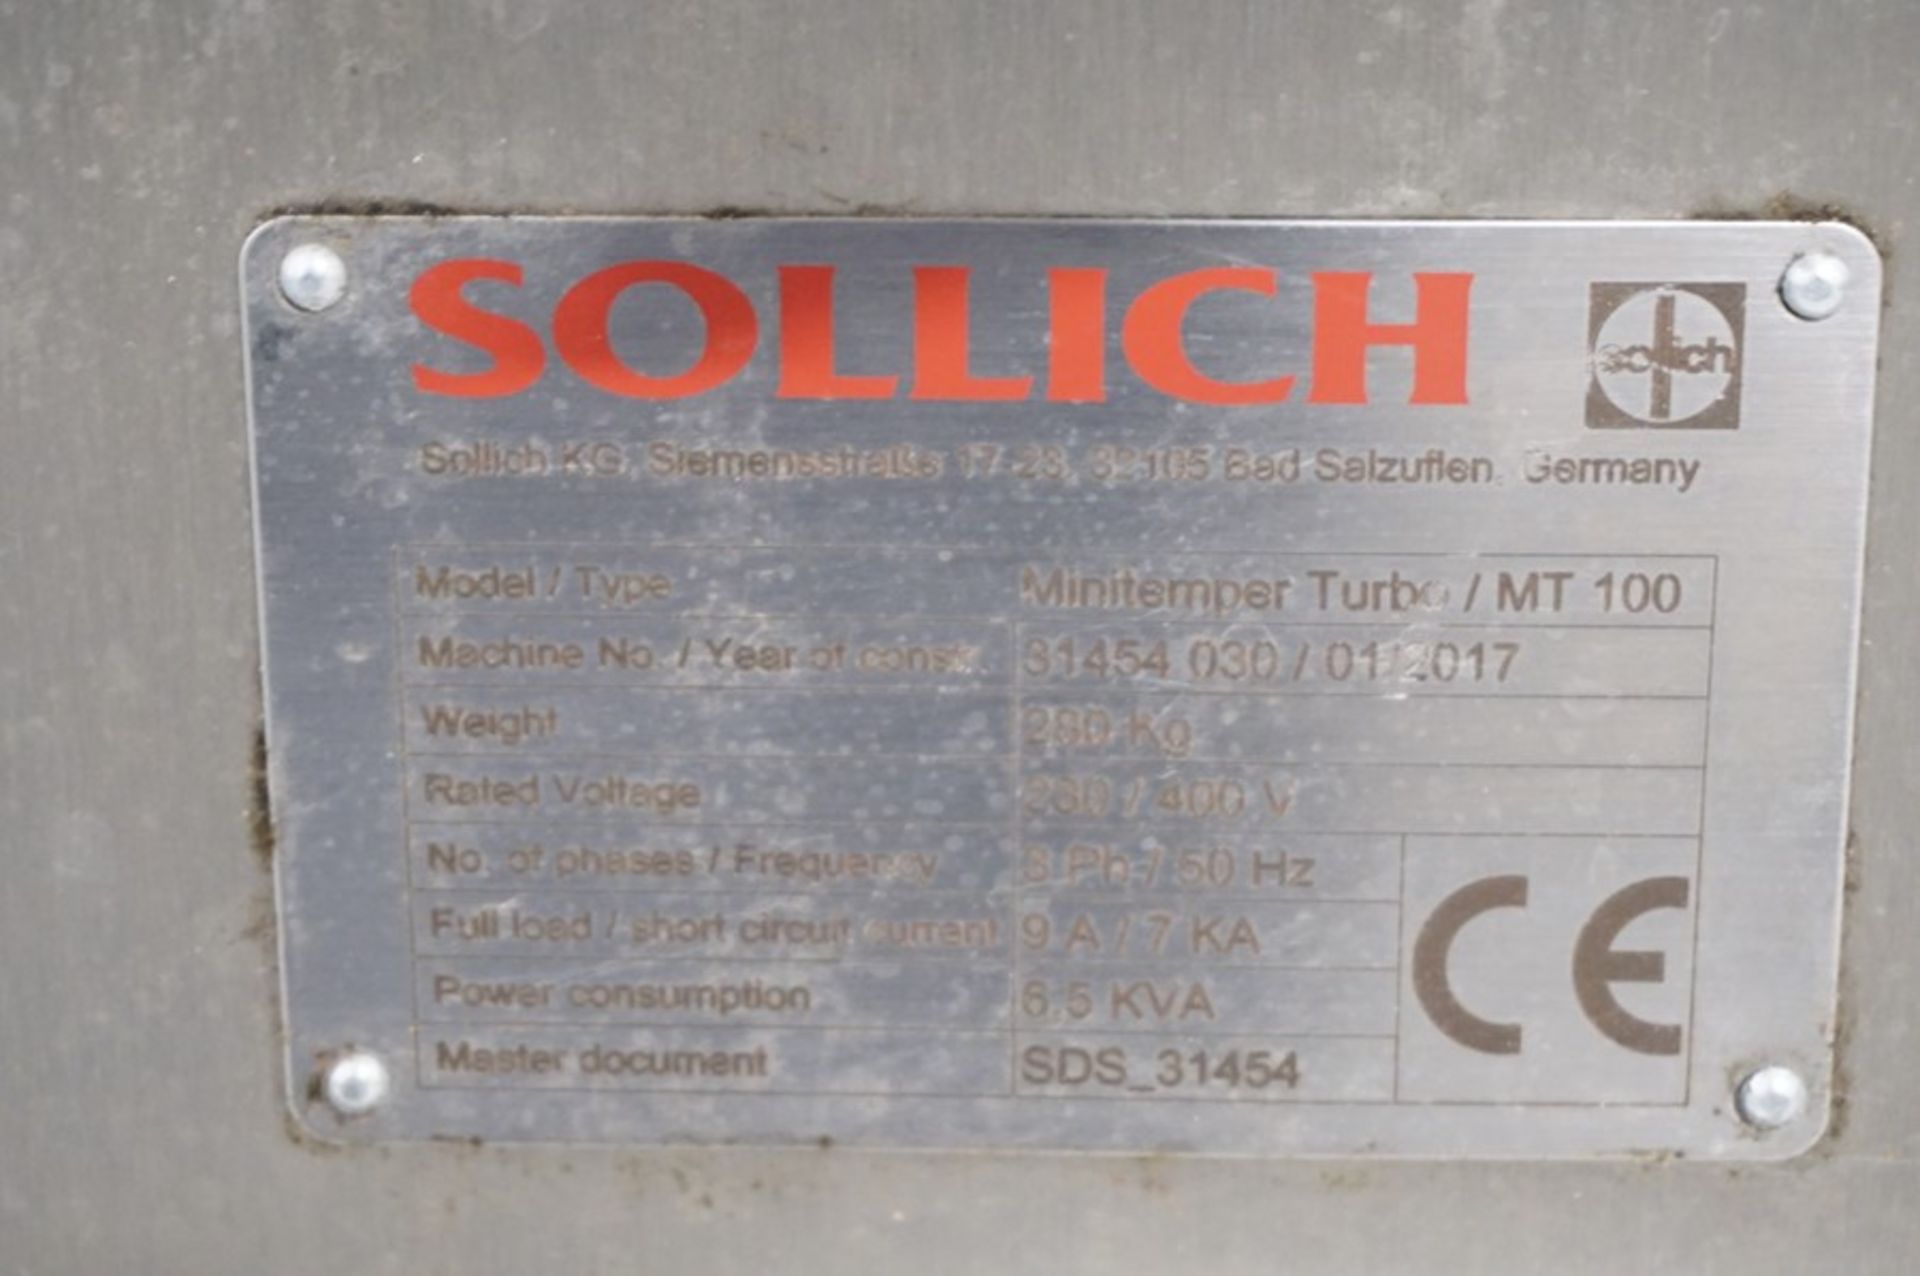 Sollich Chocolate Decorating System Comprisng: Decomatic / DC4-620, chocolate decorating machine, - Image 34 of 45